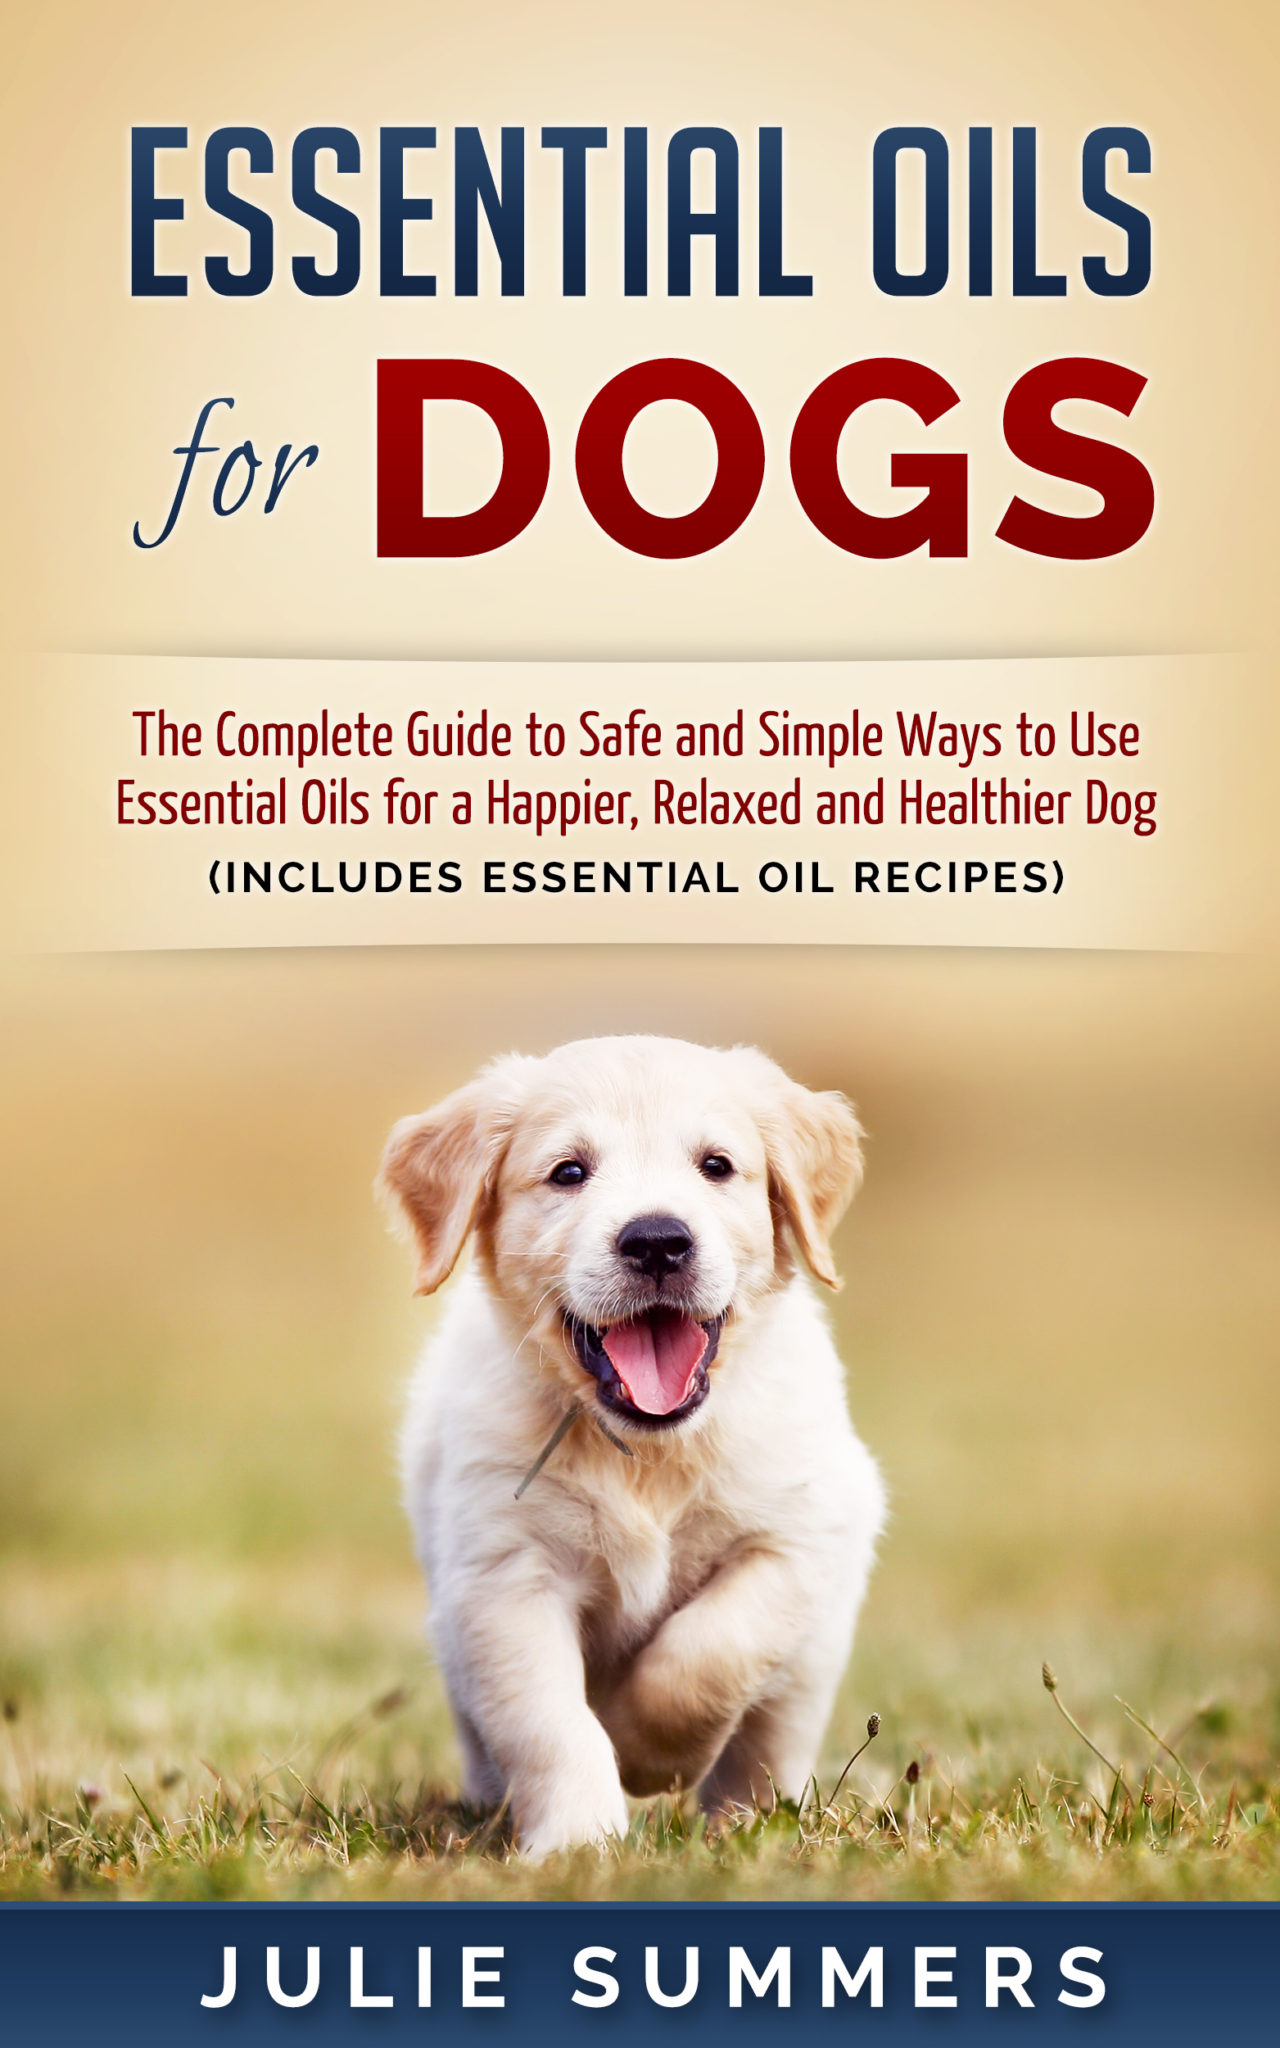 FREE: Essential Oils for Dogs: The Complete Guide to Safe and Simple Ways to Use Essential Oils for a Happier, Relaxed and Healthier Dog by Julie Summers